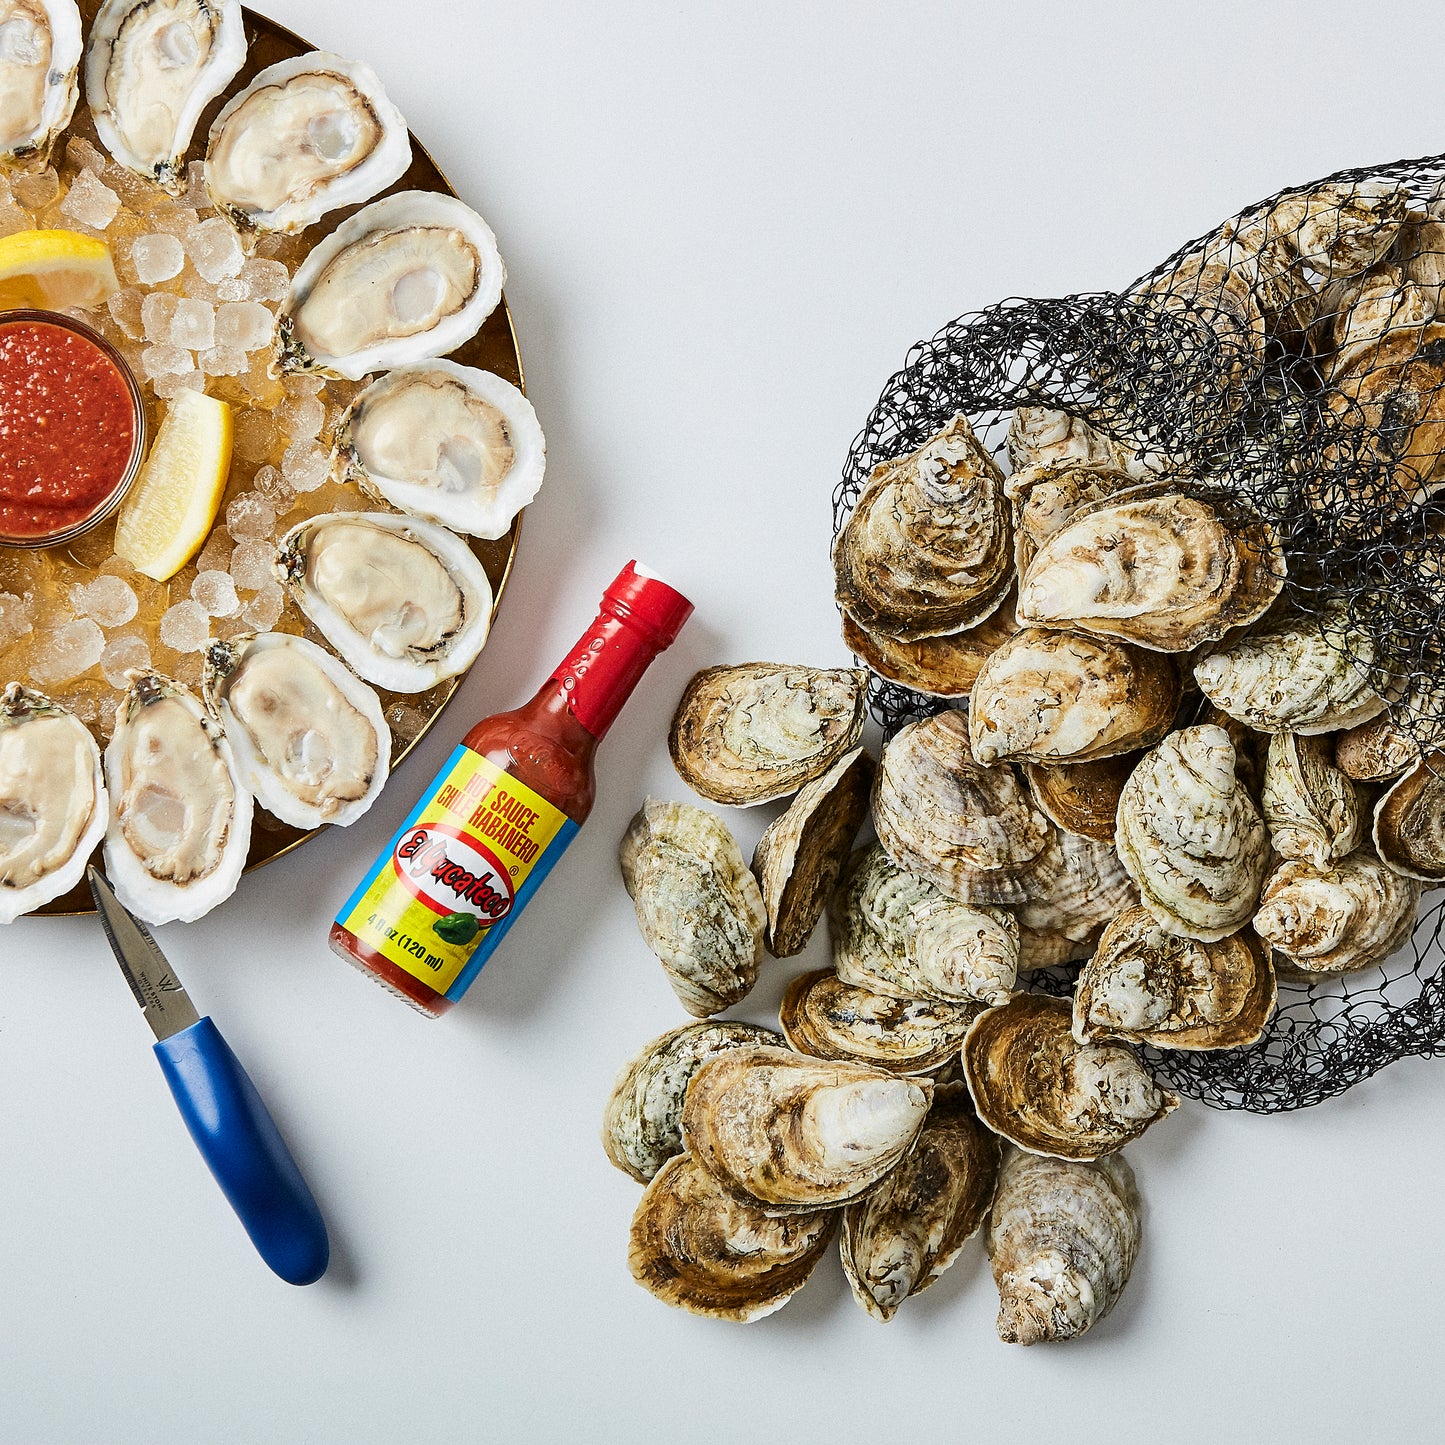 Super Bowl Oysters -  try shaking things up with a seafood spread